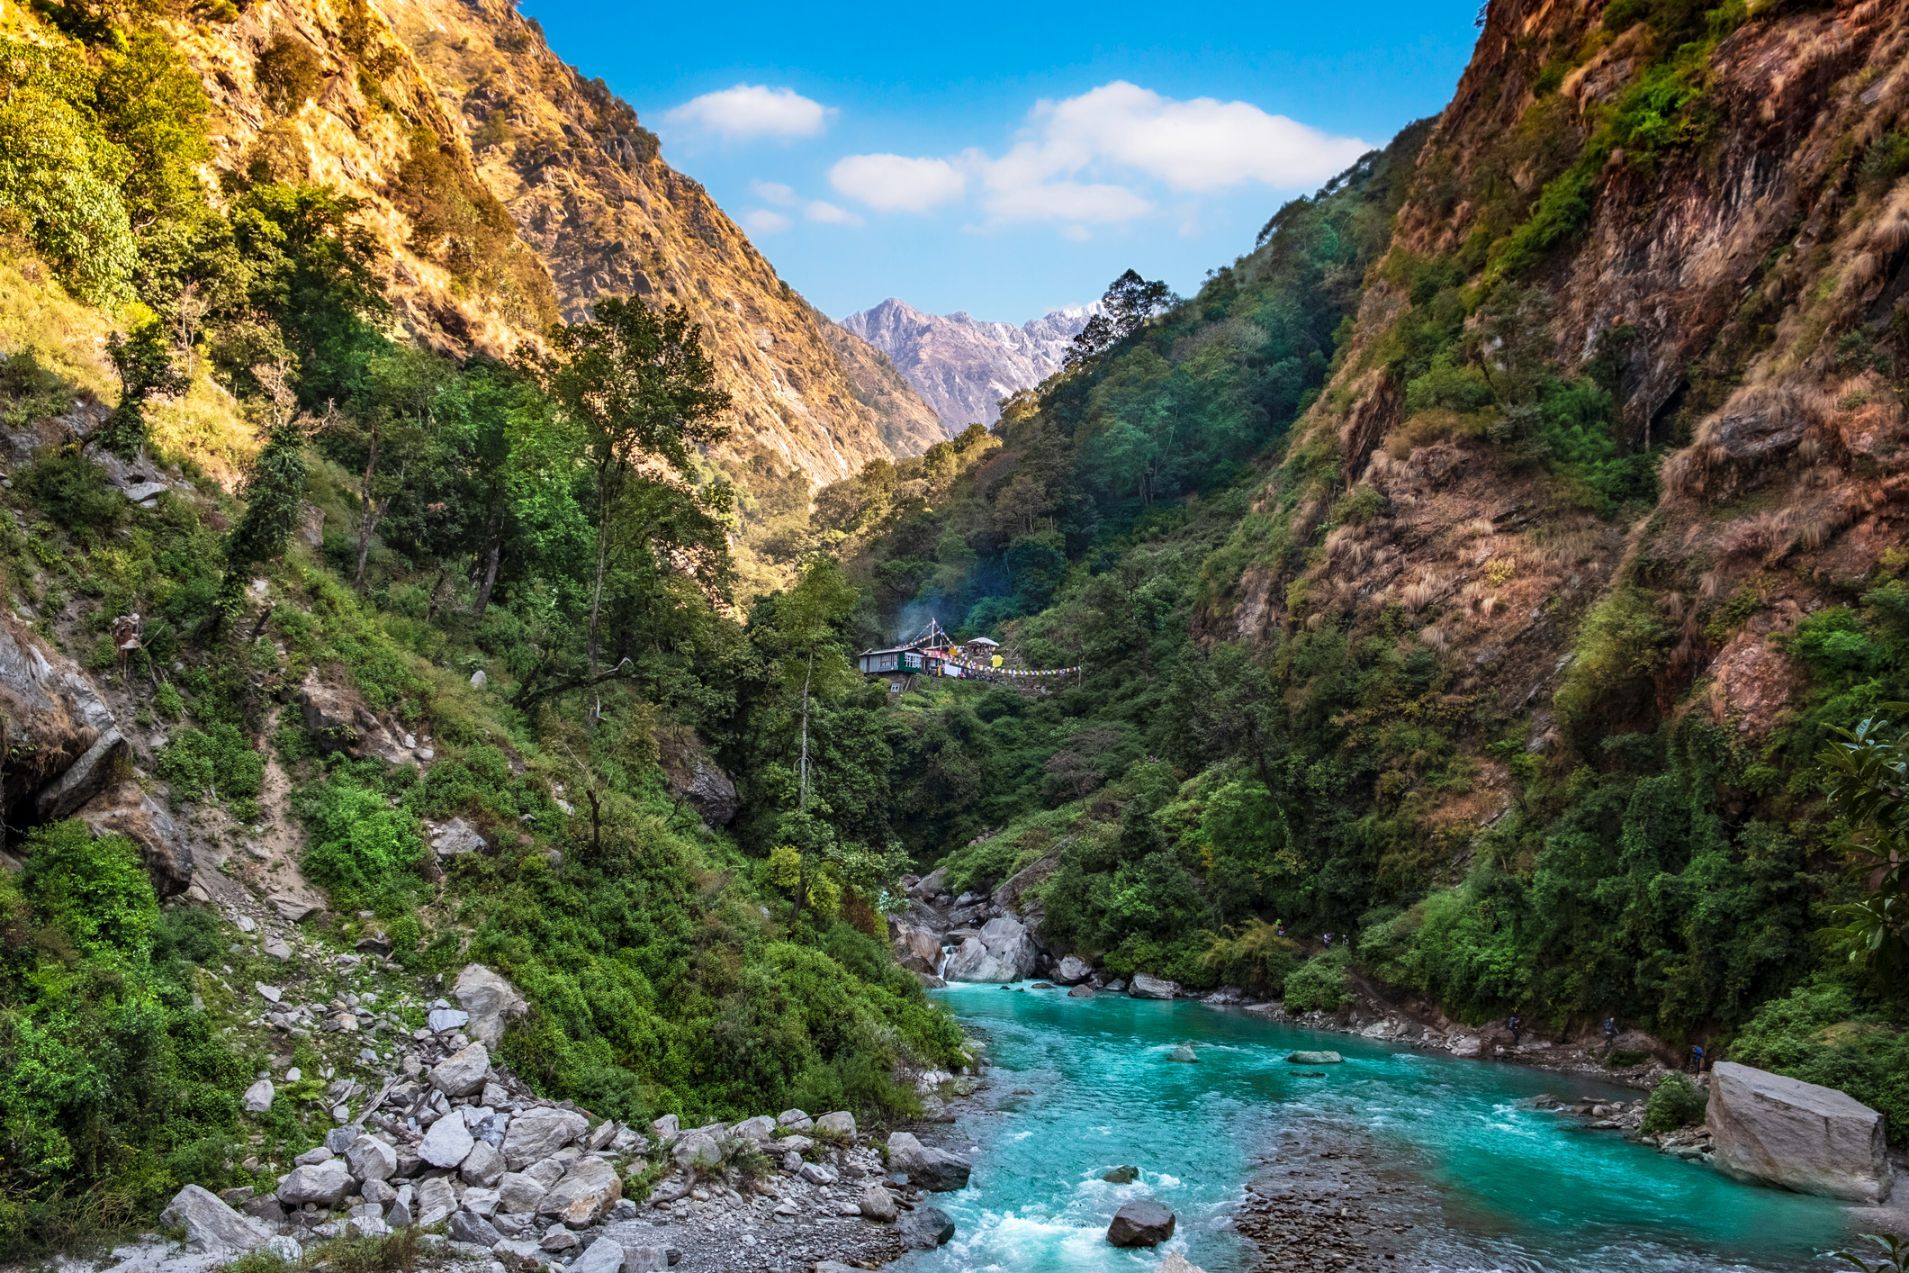 The beautiful Langtang River, which runs through the valley. 